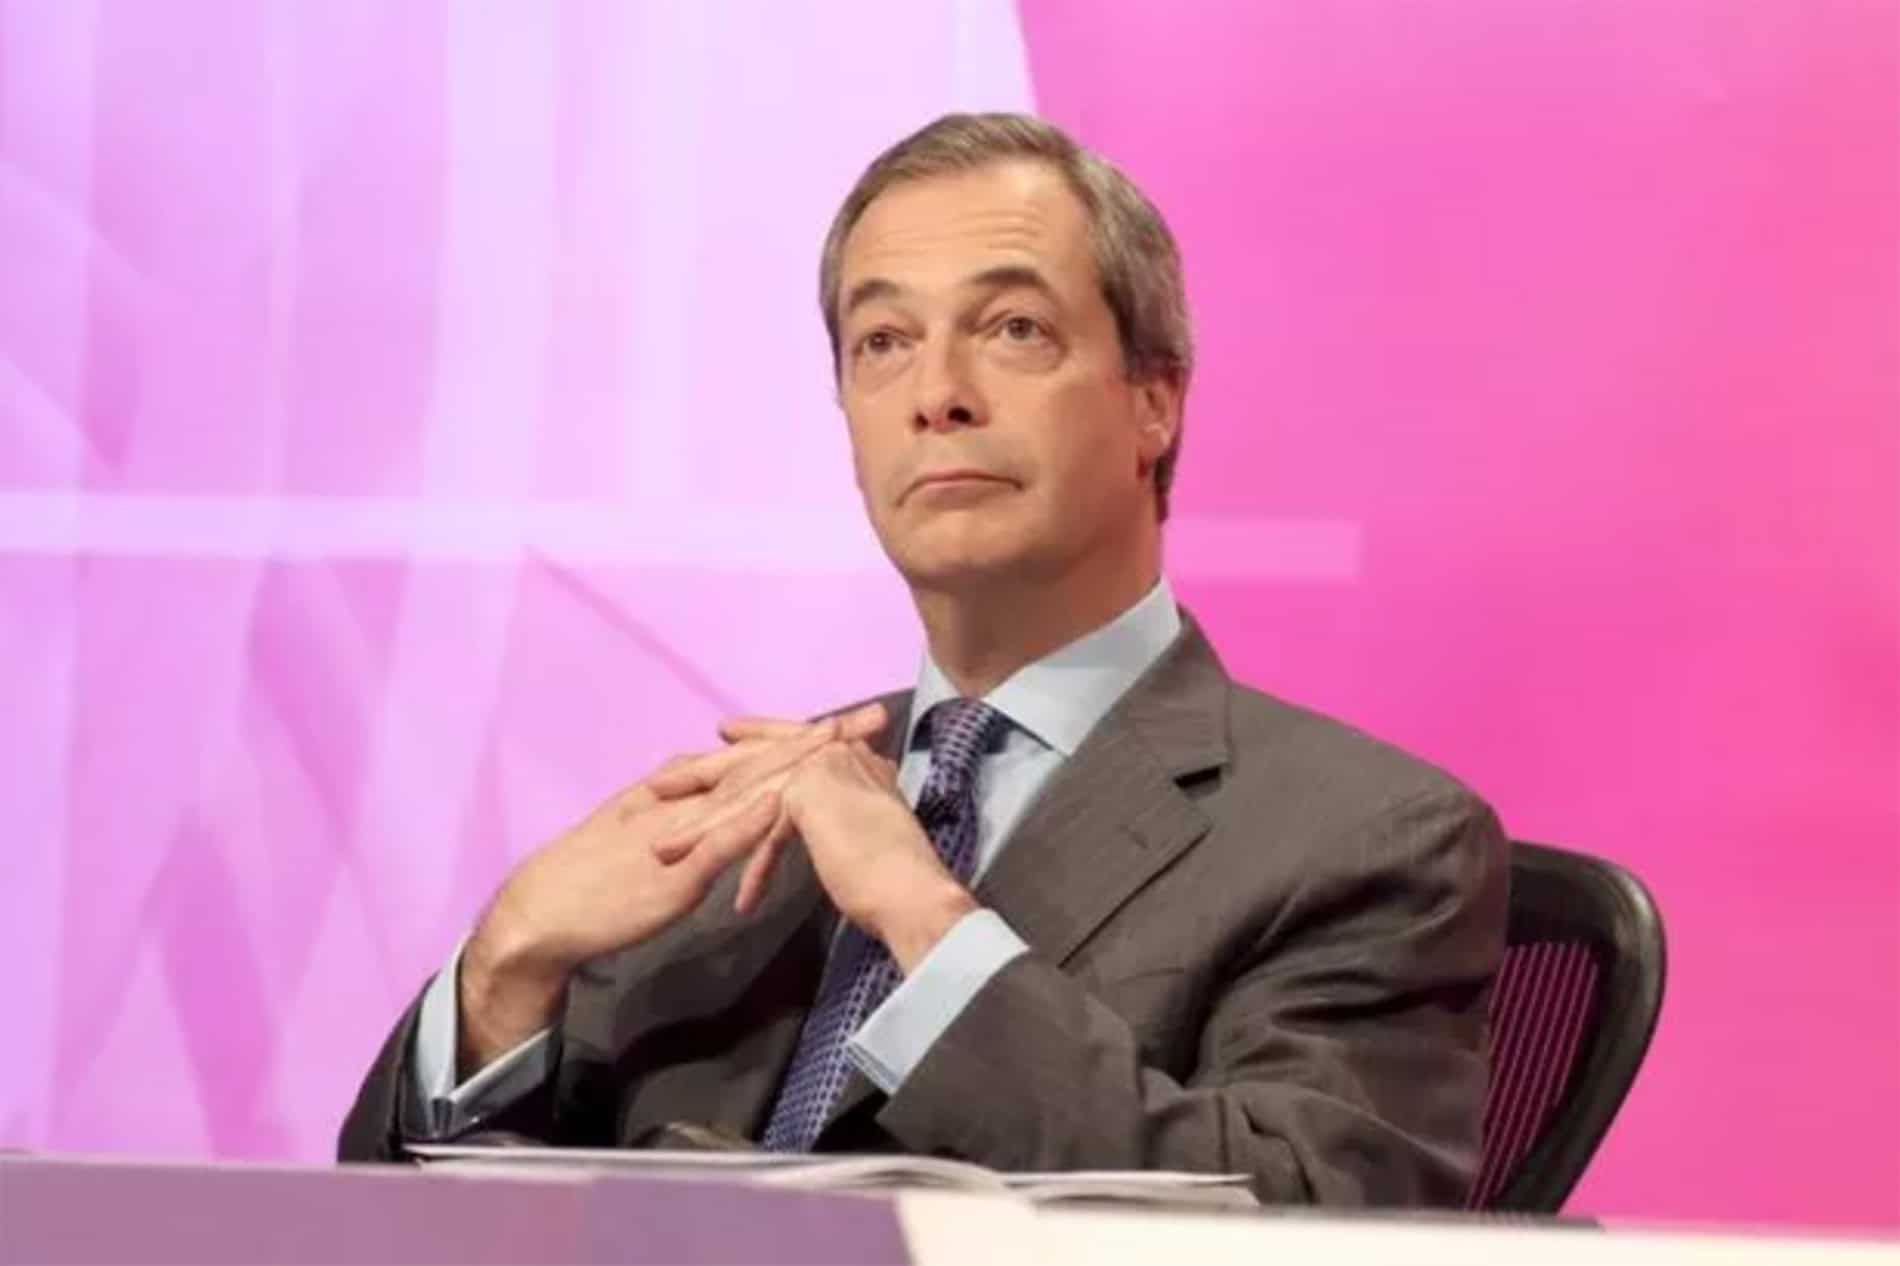 Farage to appear on Question Time as BBC bosses quizzed on ‘massively unbalanced’ panels